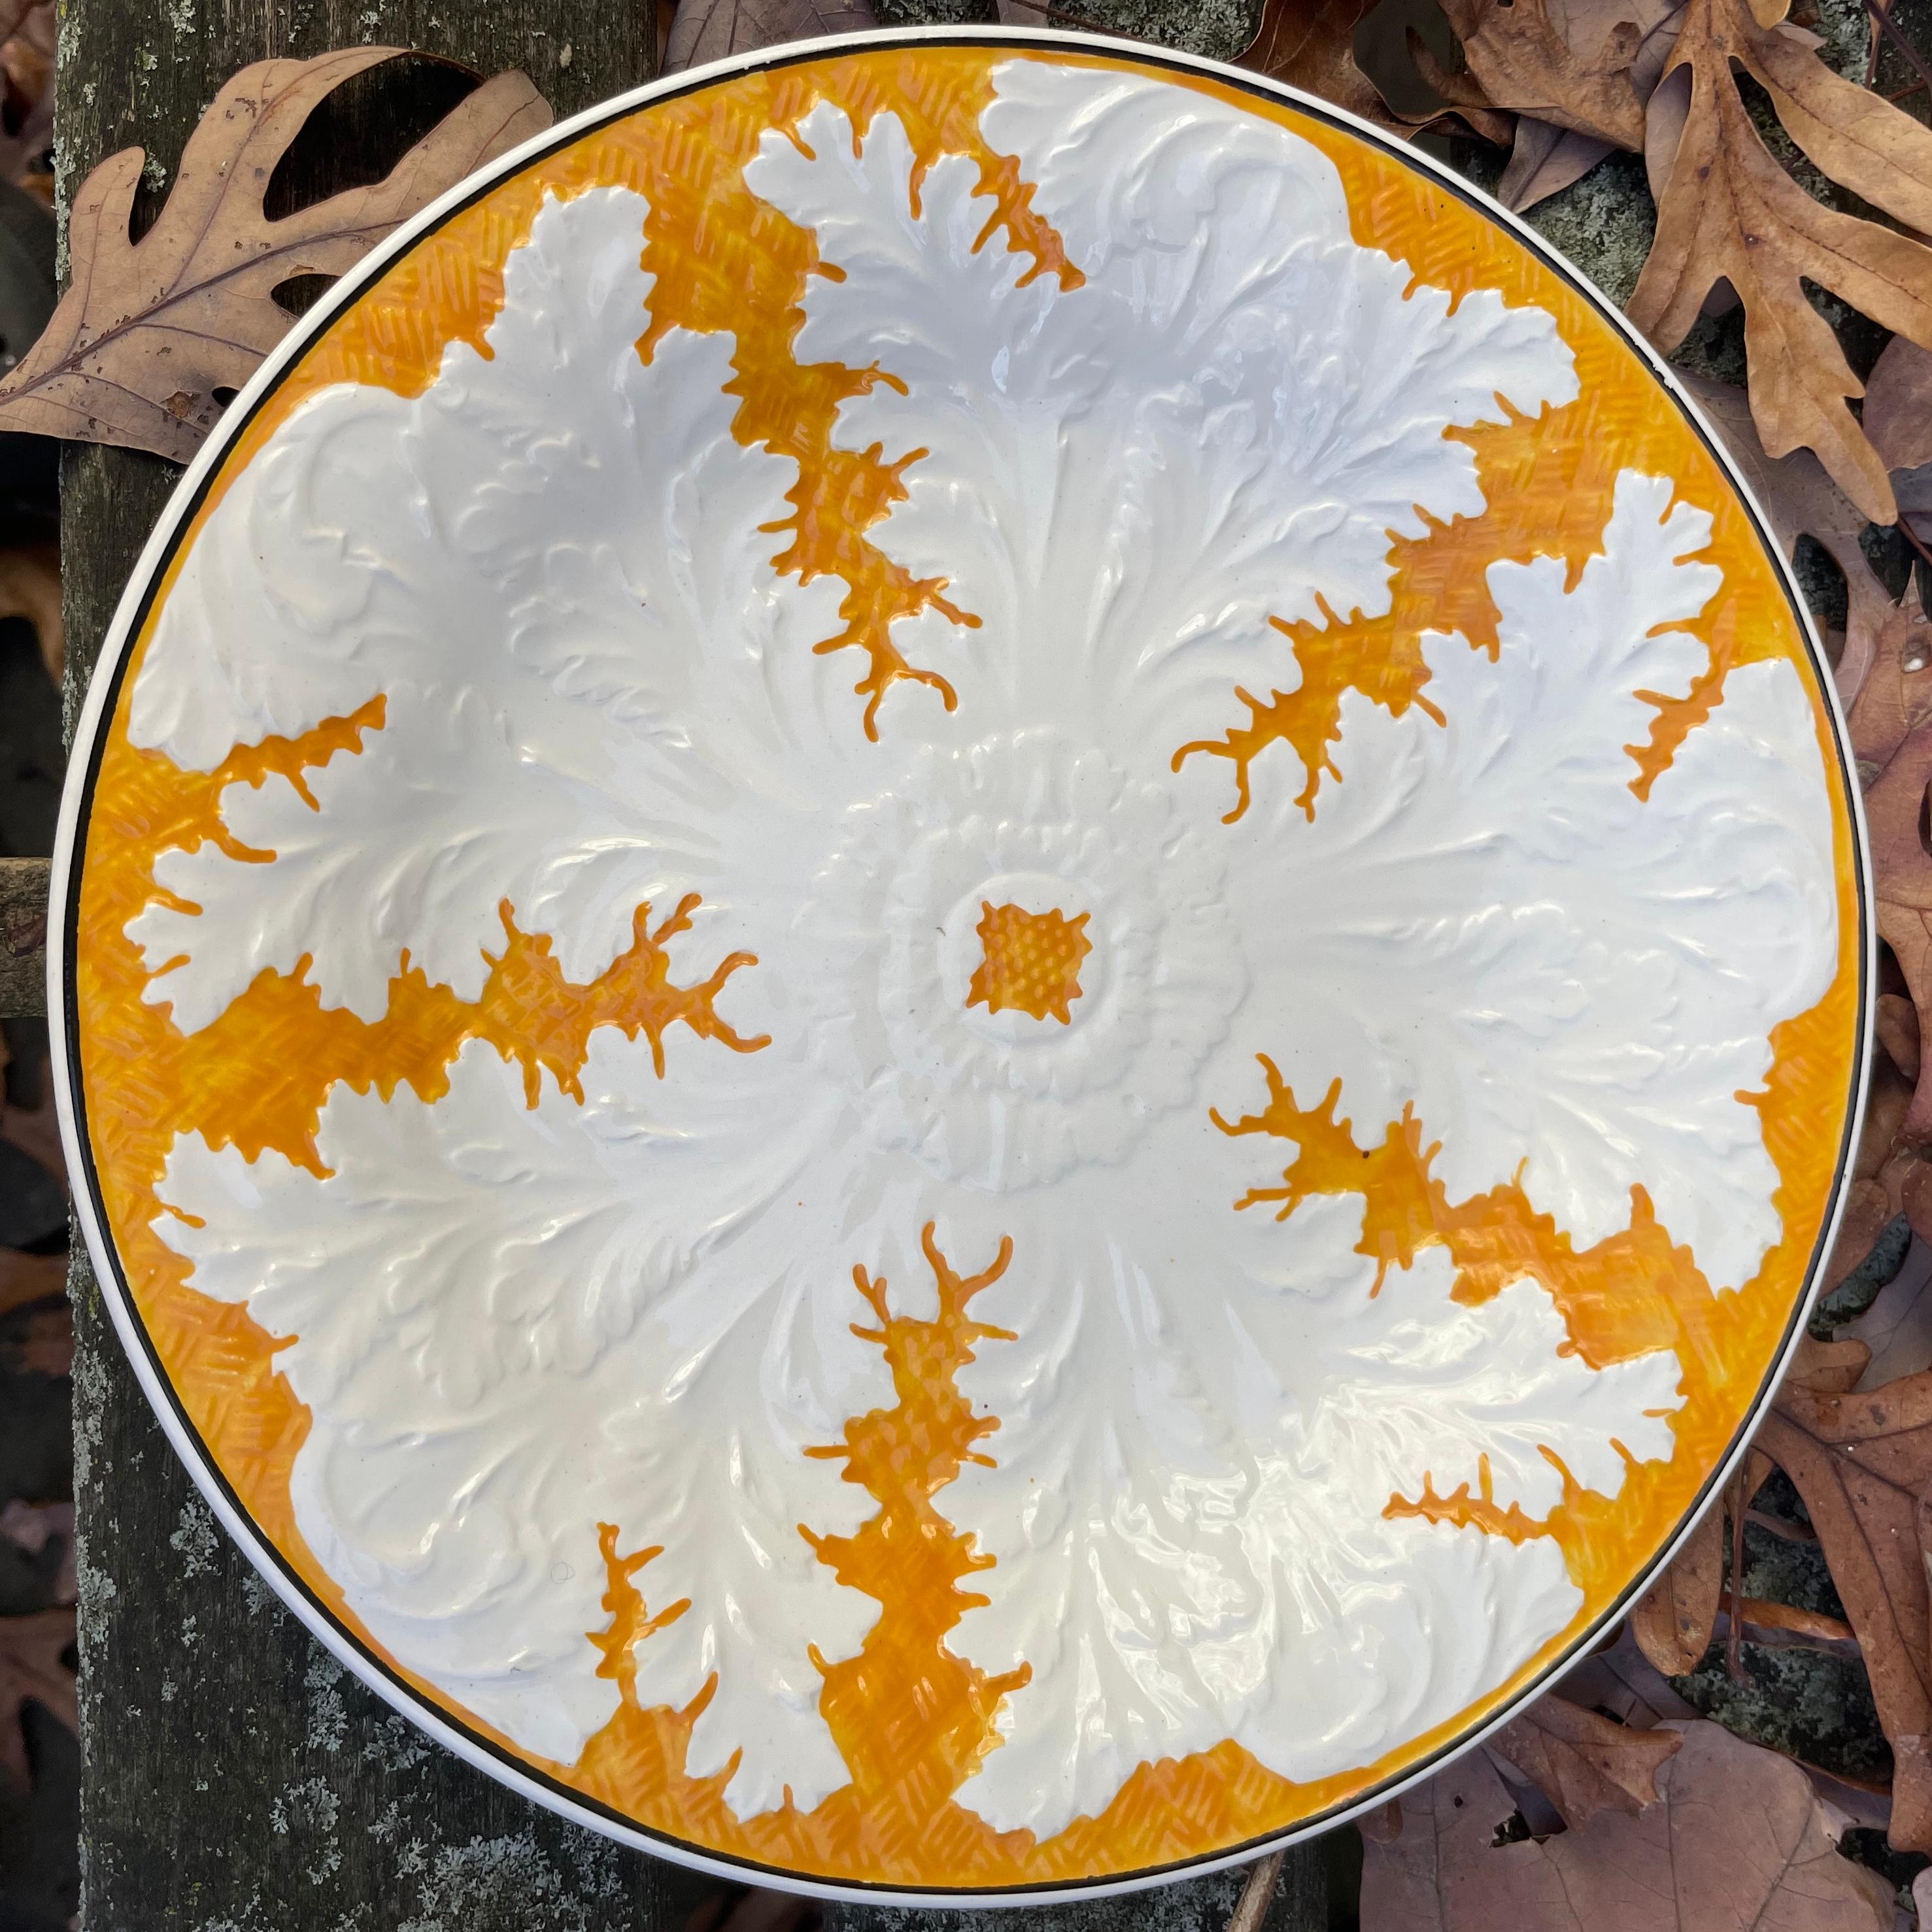 Set of eight orange and white Wedgwood cabbage plates. Eight creamware plates with molded cabbage leaves in white on orange saffron background with thin black rims. England, mid-twentieth century.
Dimensions: 9